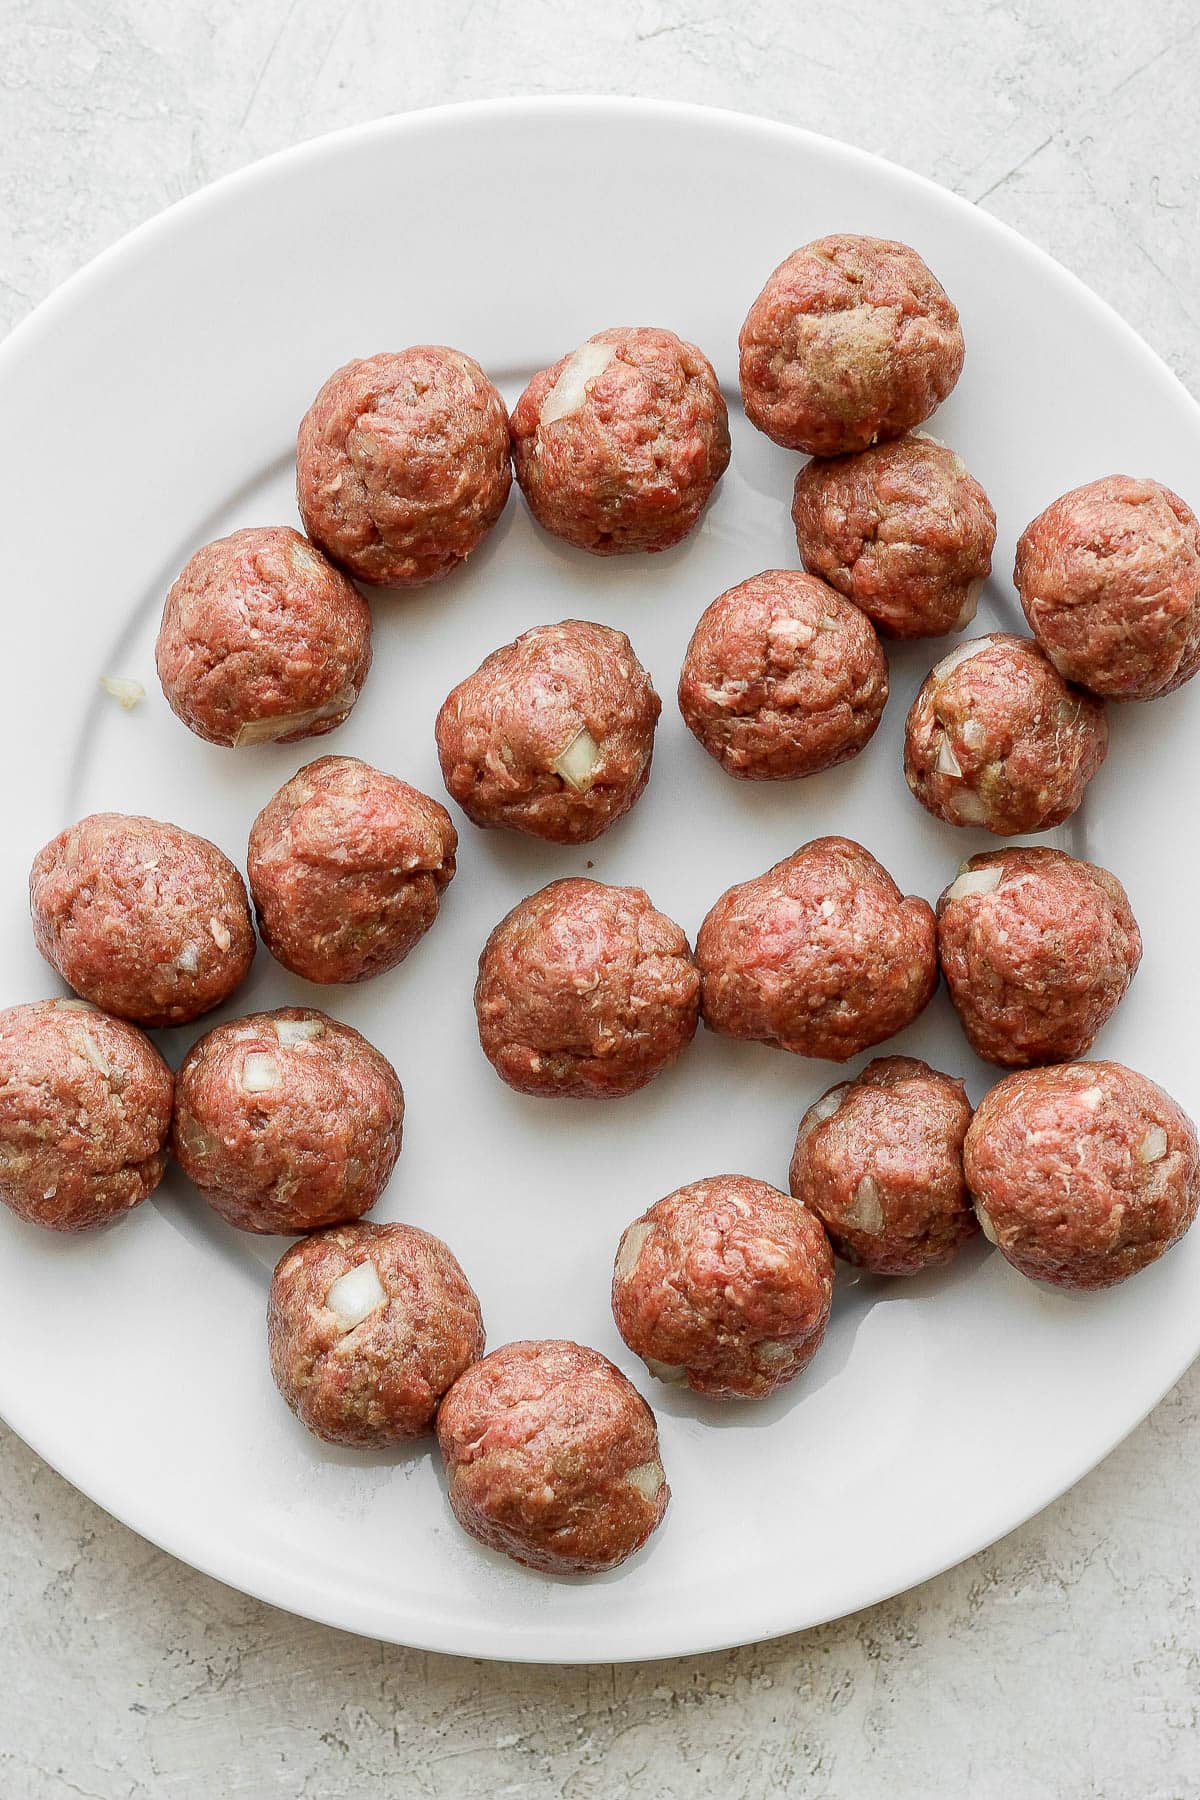 Plate of rolled meatballs before cooking.